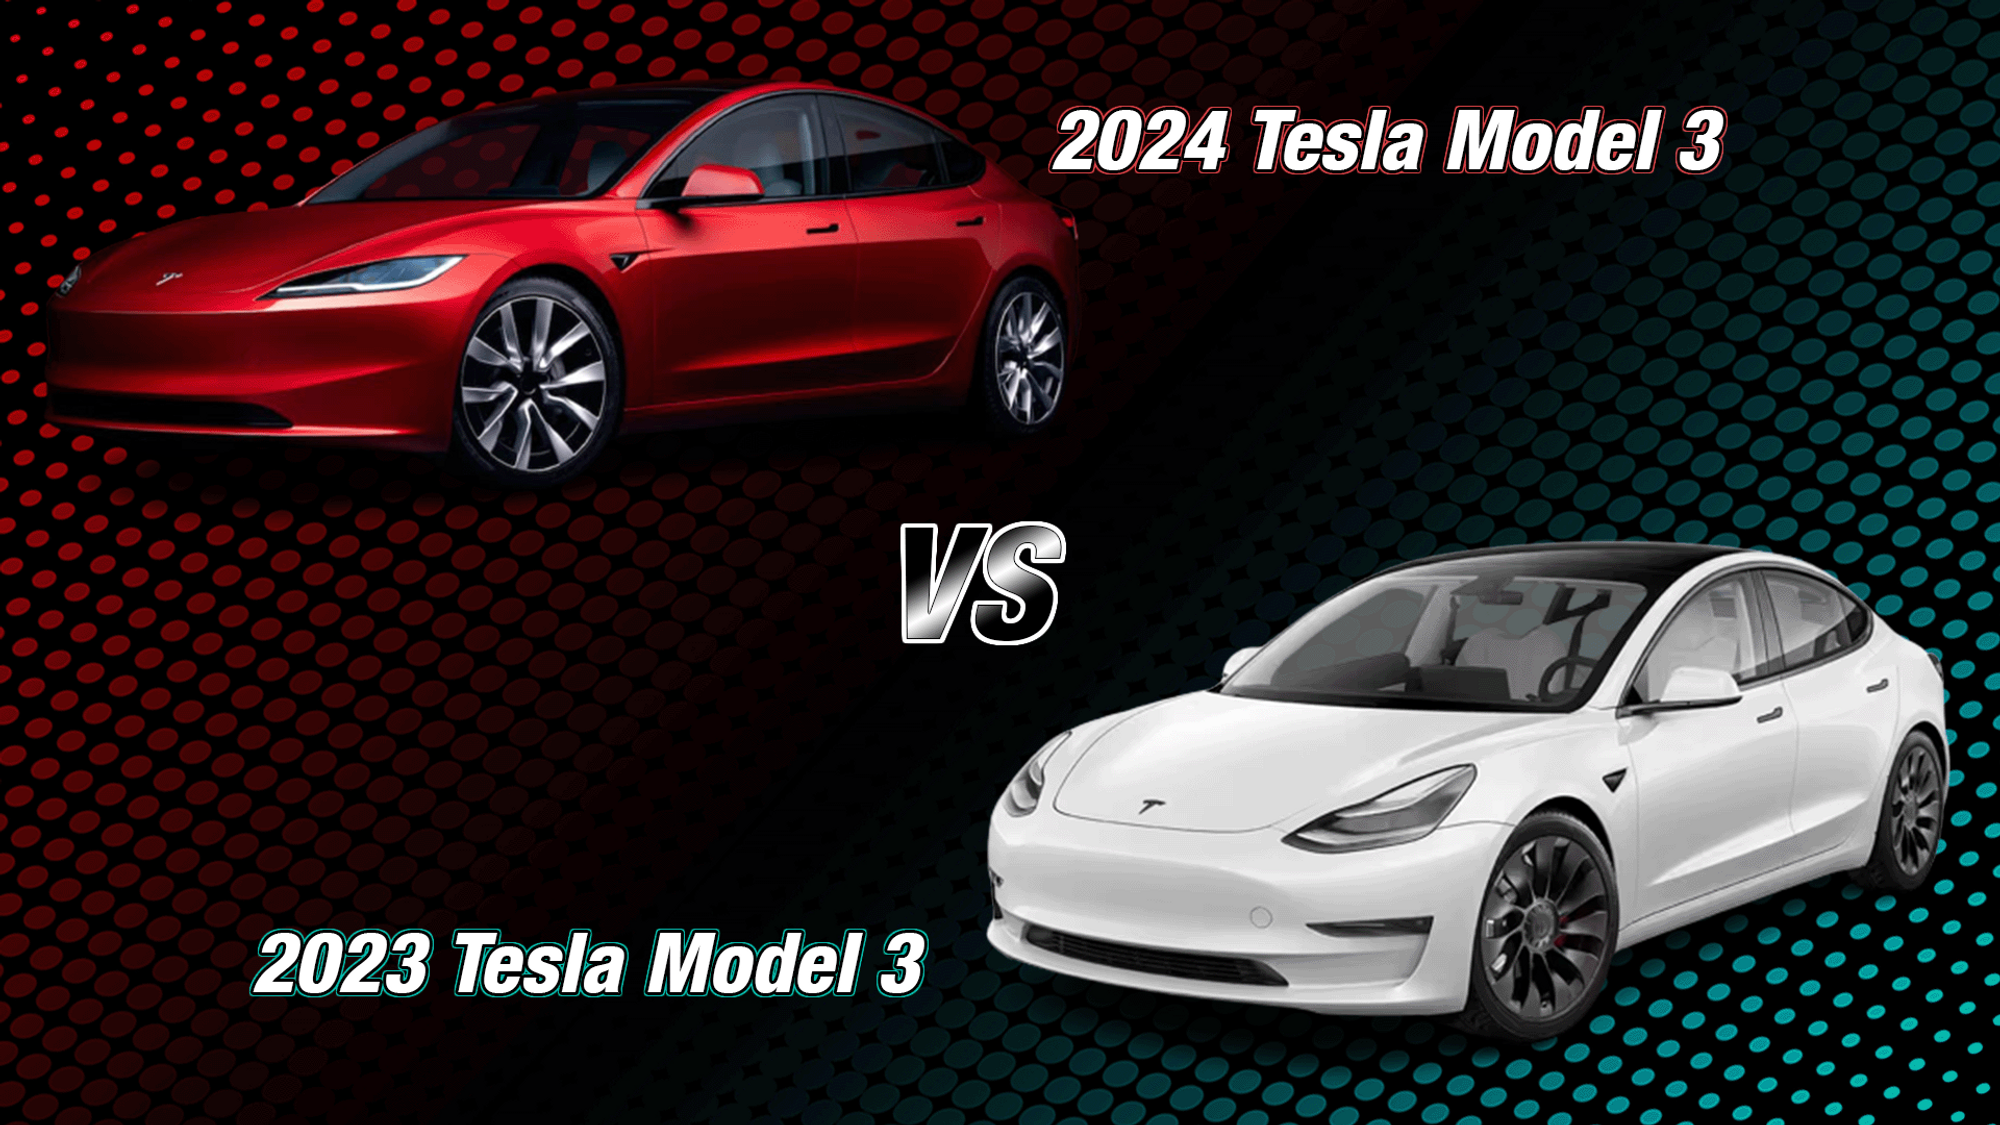 2024 vs 2023 Tesla Model 3 RWD: Comparison of Specs and Features